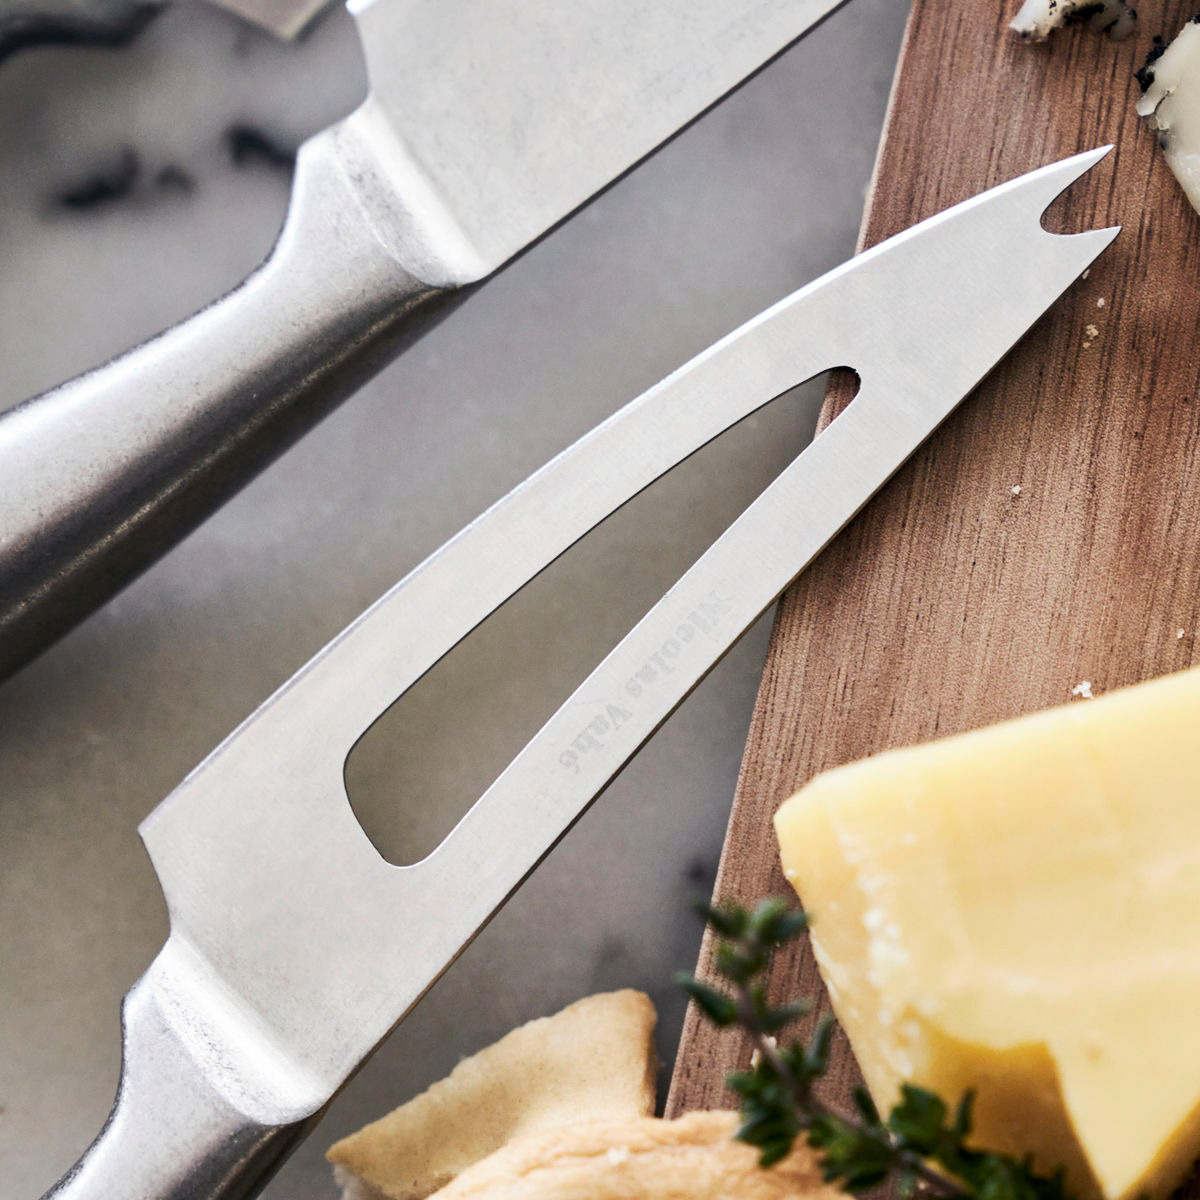 https://www.nordicnest.com/assets/blobs/nicolas-vahe-fromage-cheese-knife-set-of-3-stainless-steel/571972-01_11_EnvironmentImage-86bab71f6b.jpeg